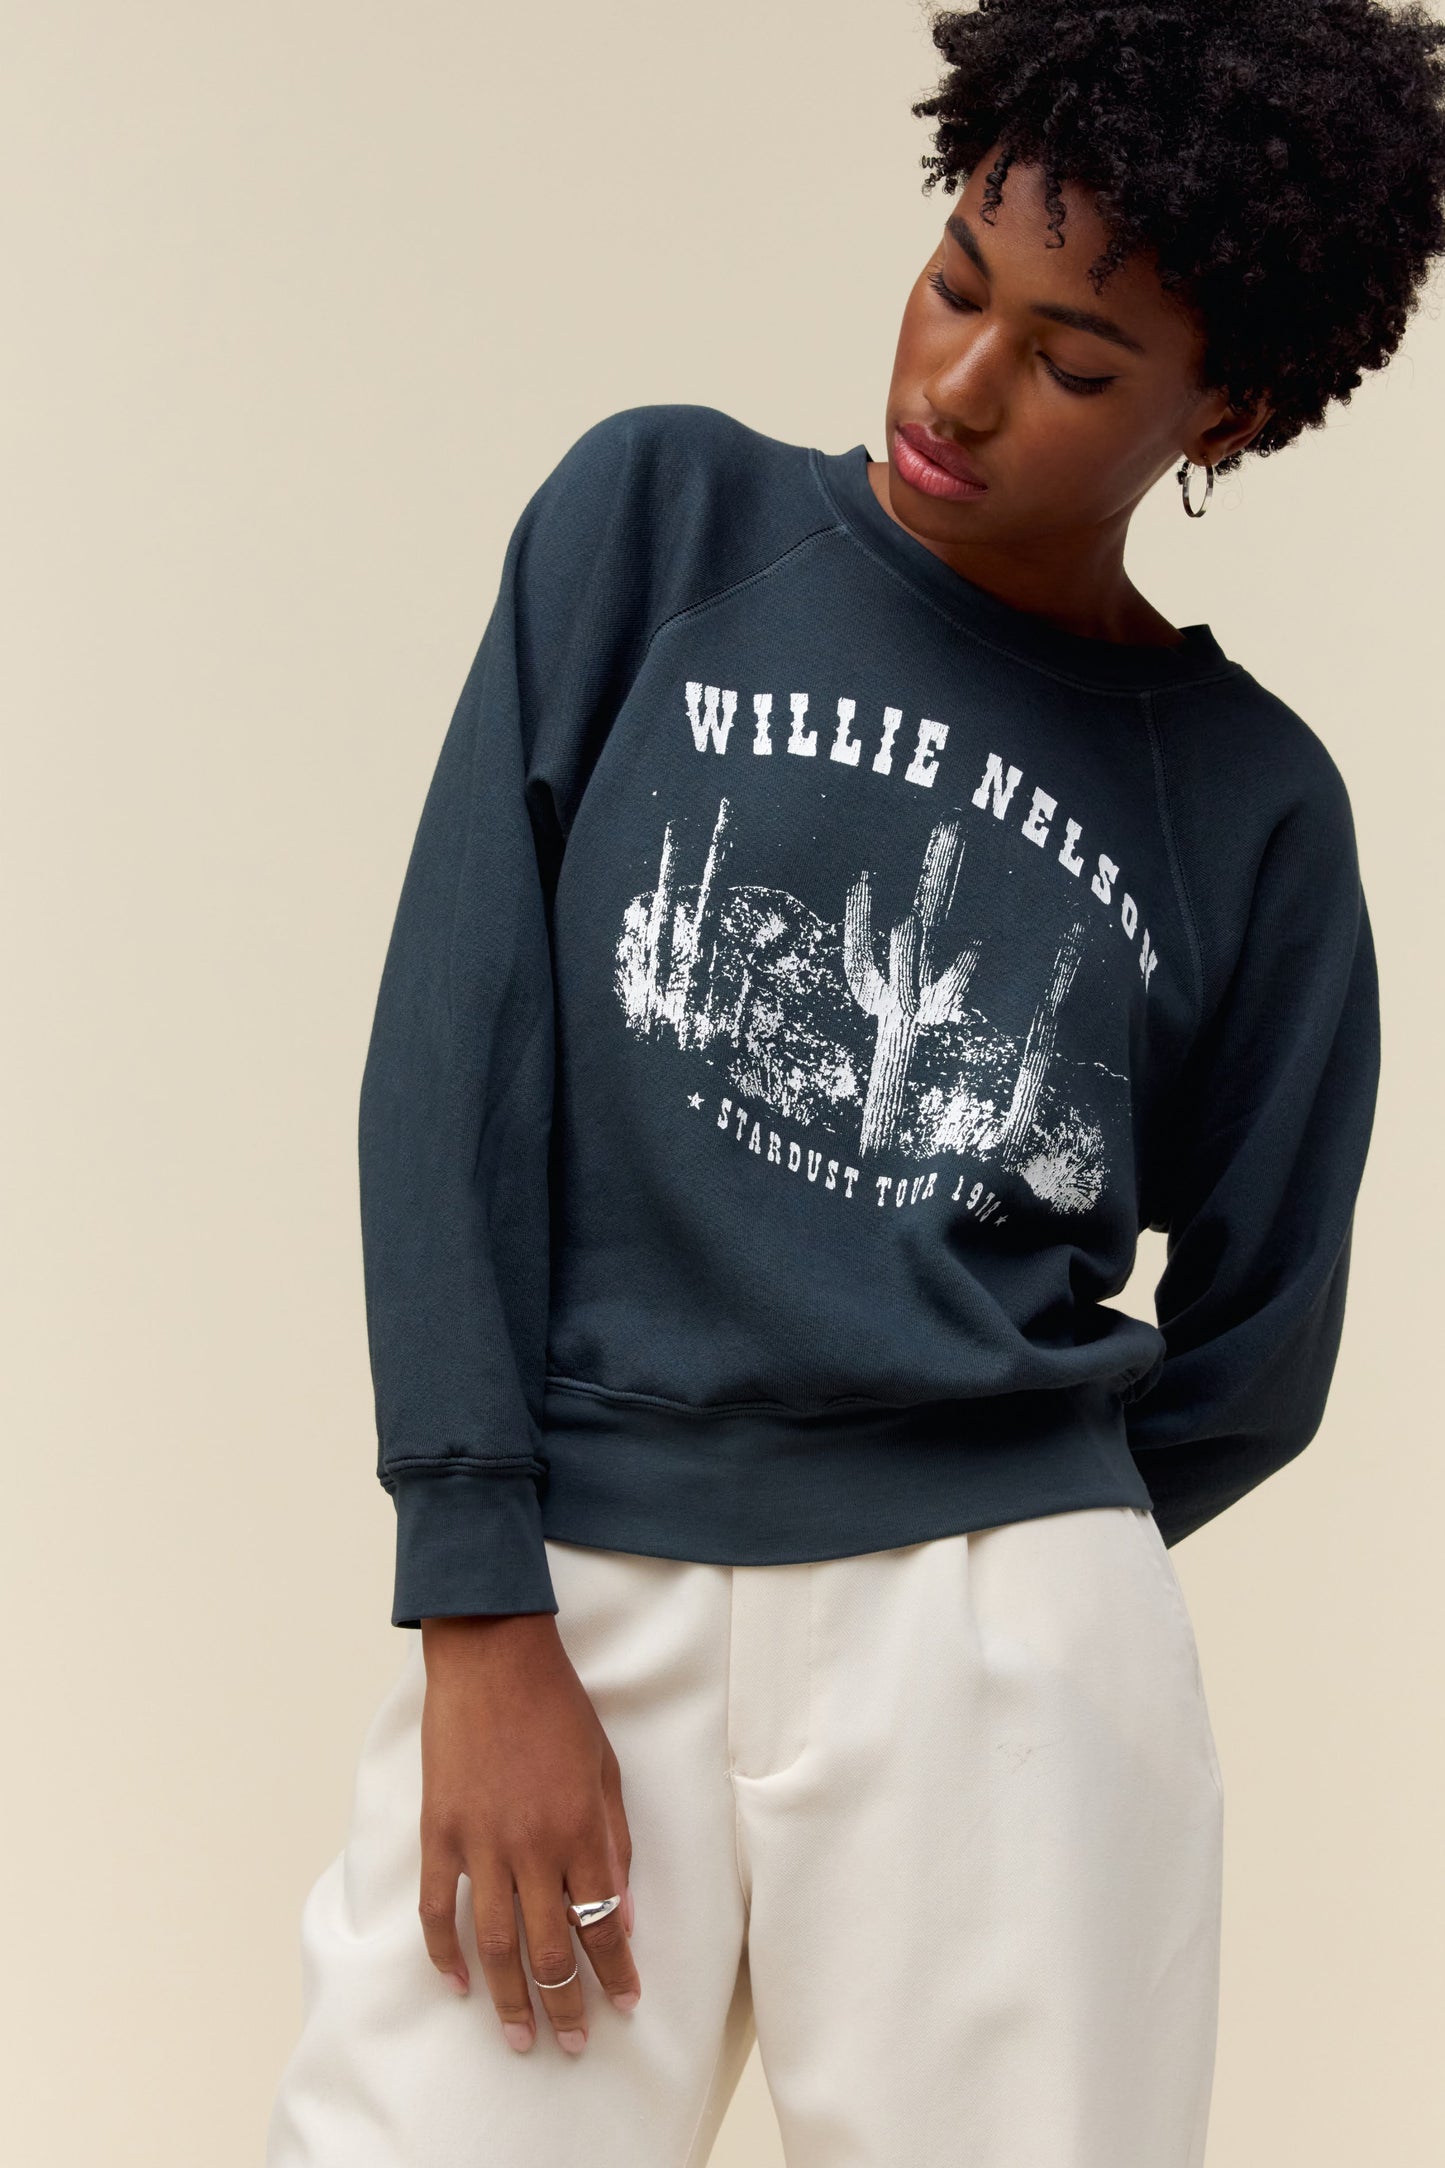 A model featuring a vintage black long sleeve stamped with Willie Nelson in white large font.